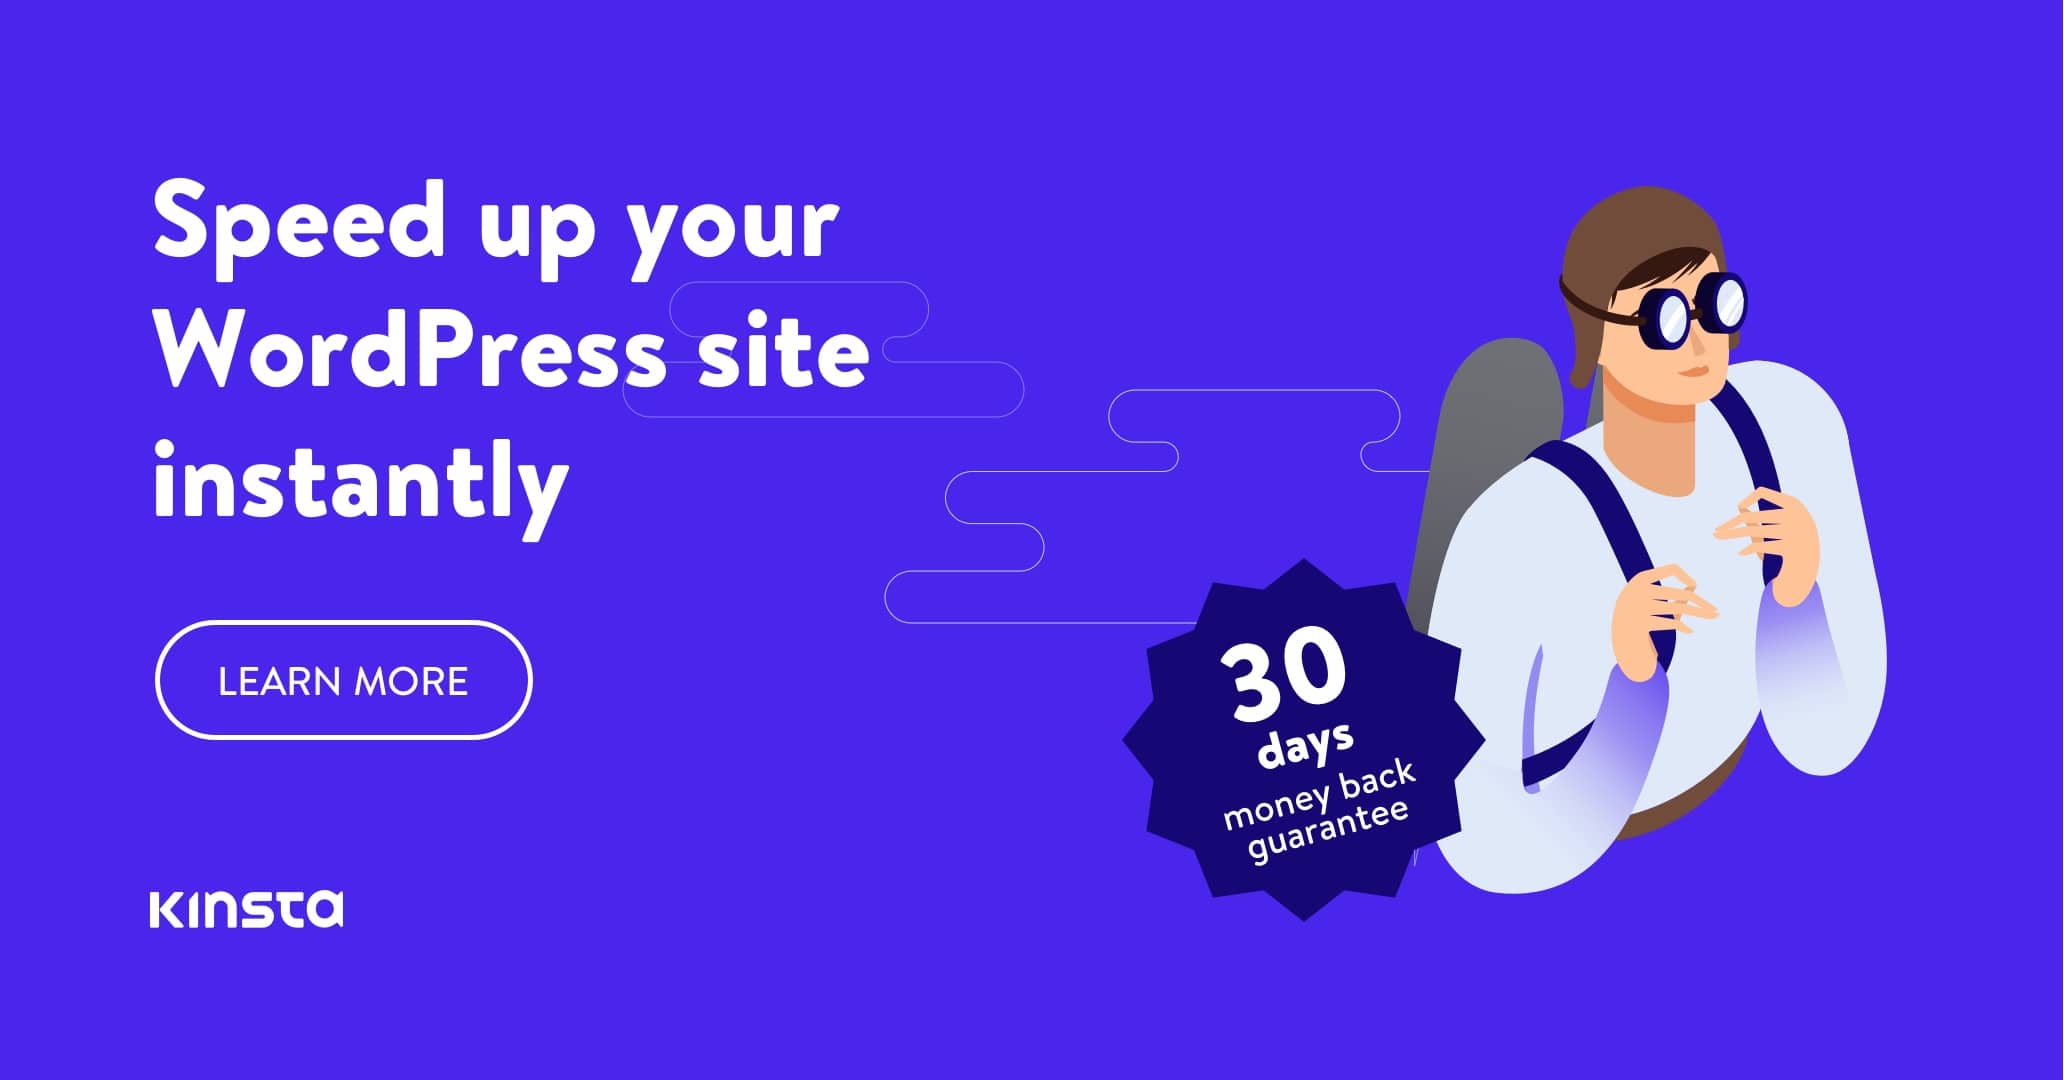 Kinsta has the fastest site speed